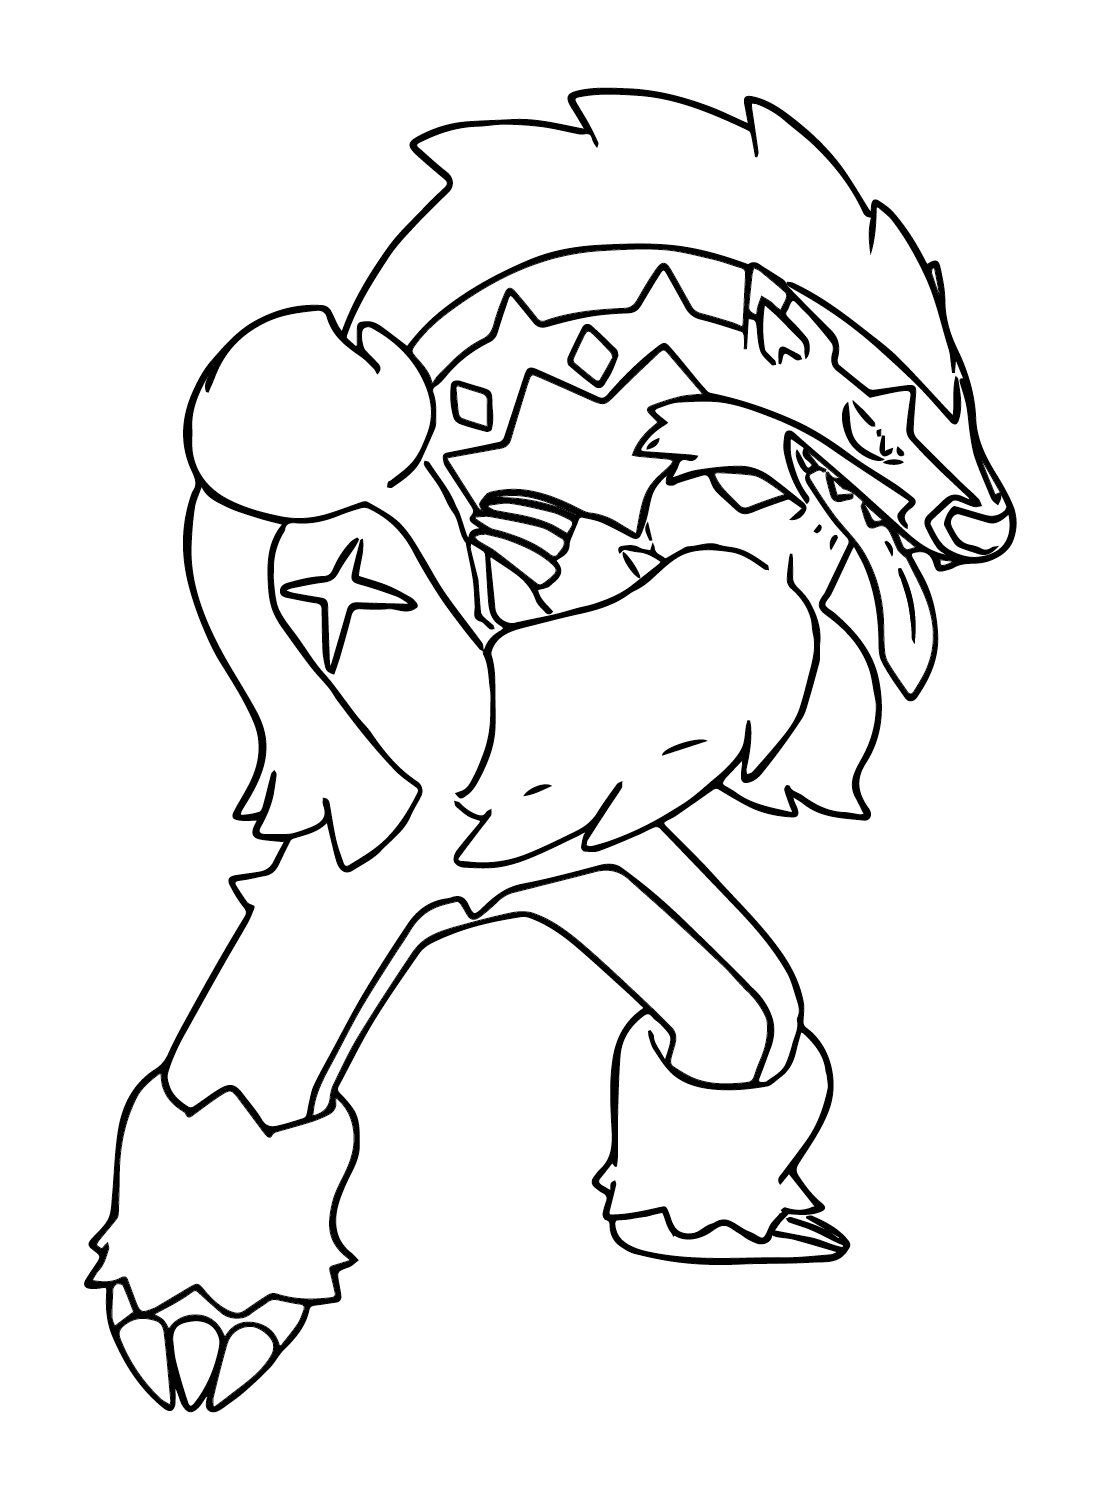 Obstagoon Drawing Coloring Page